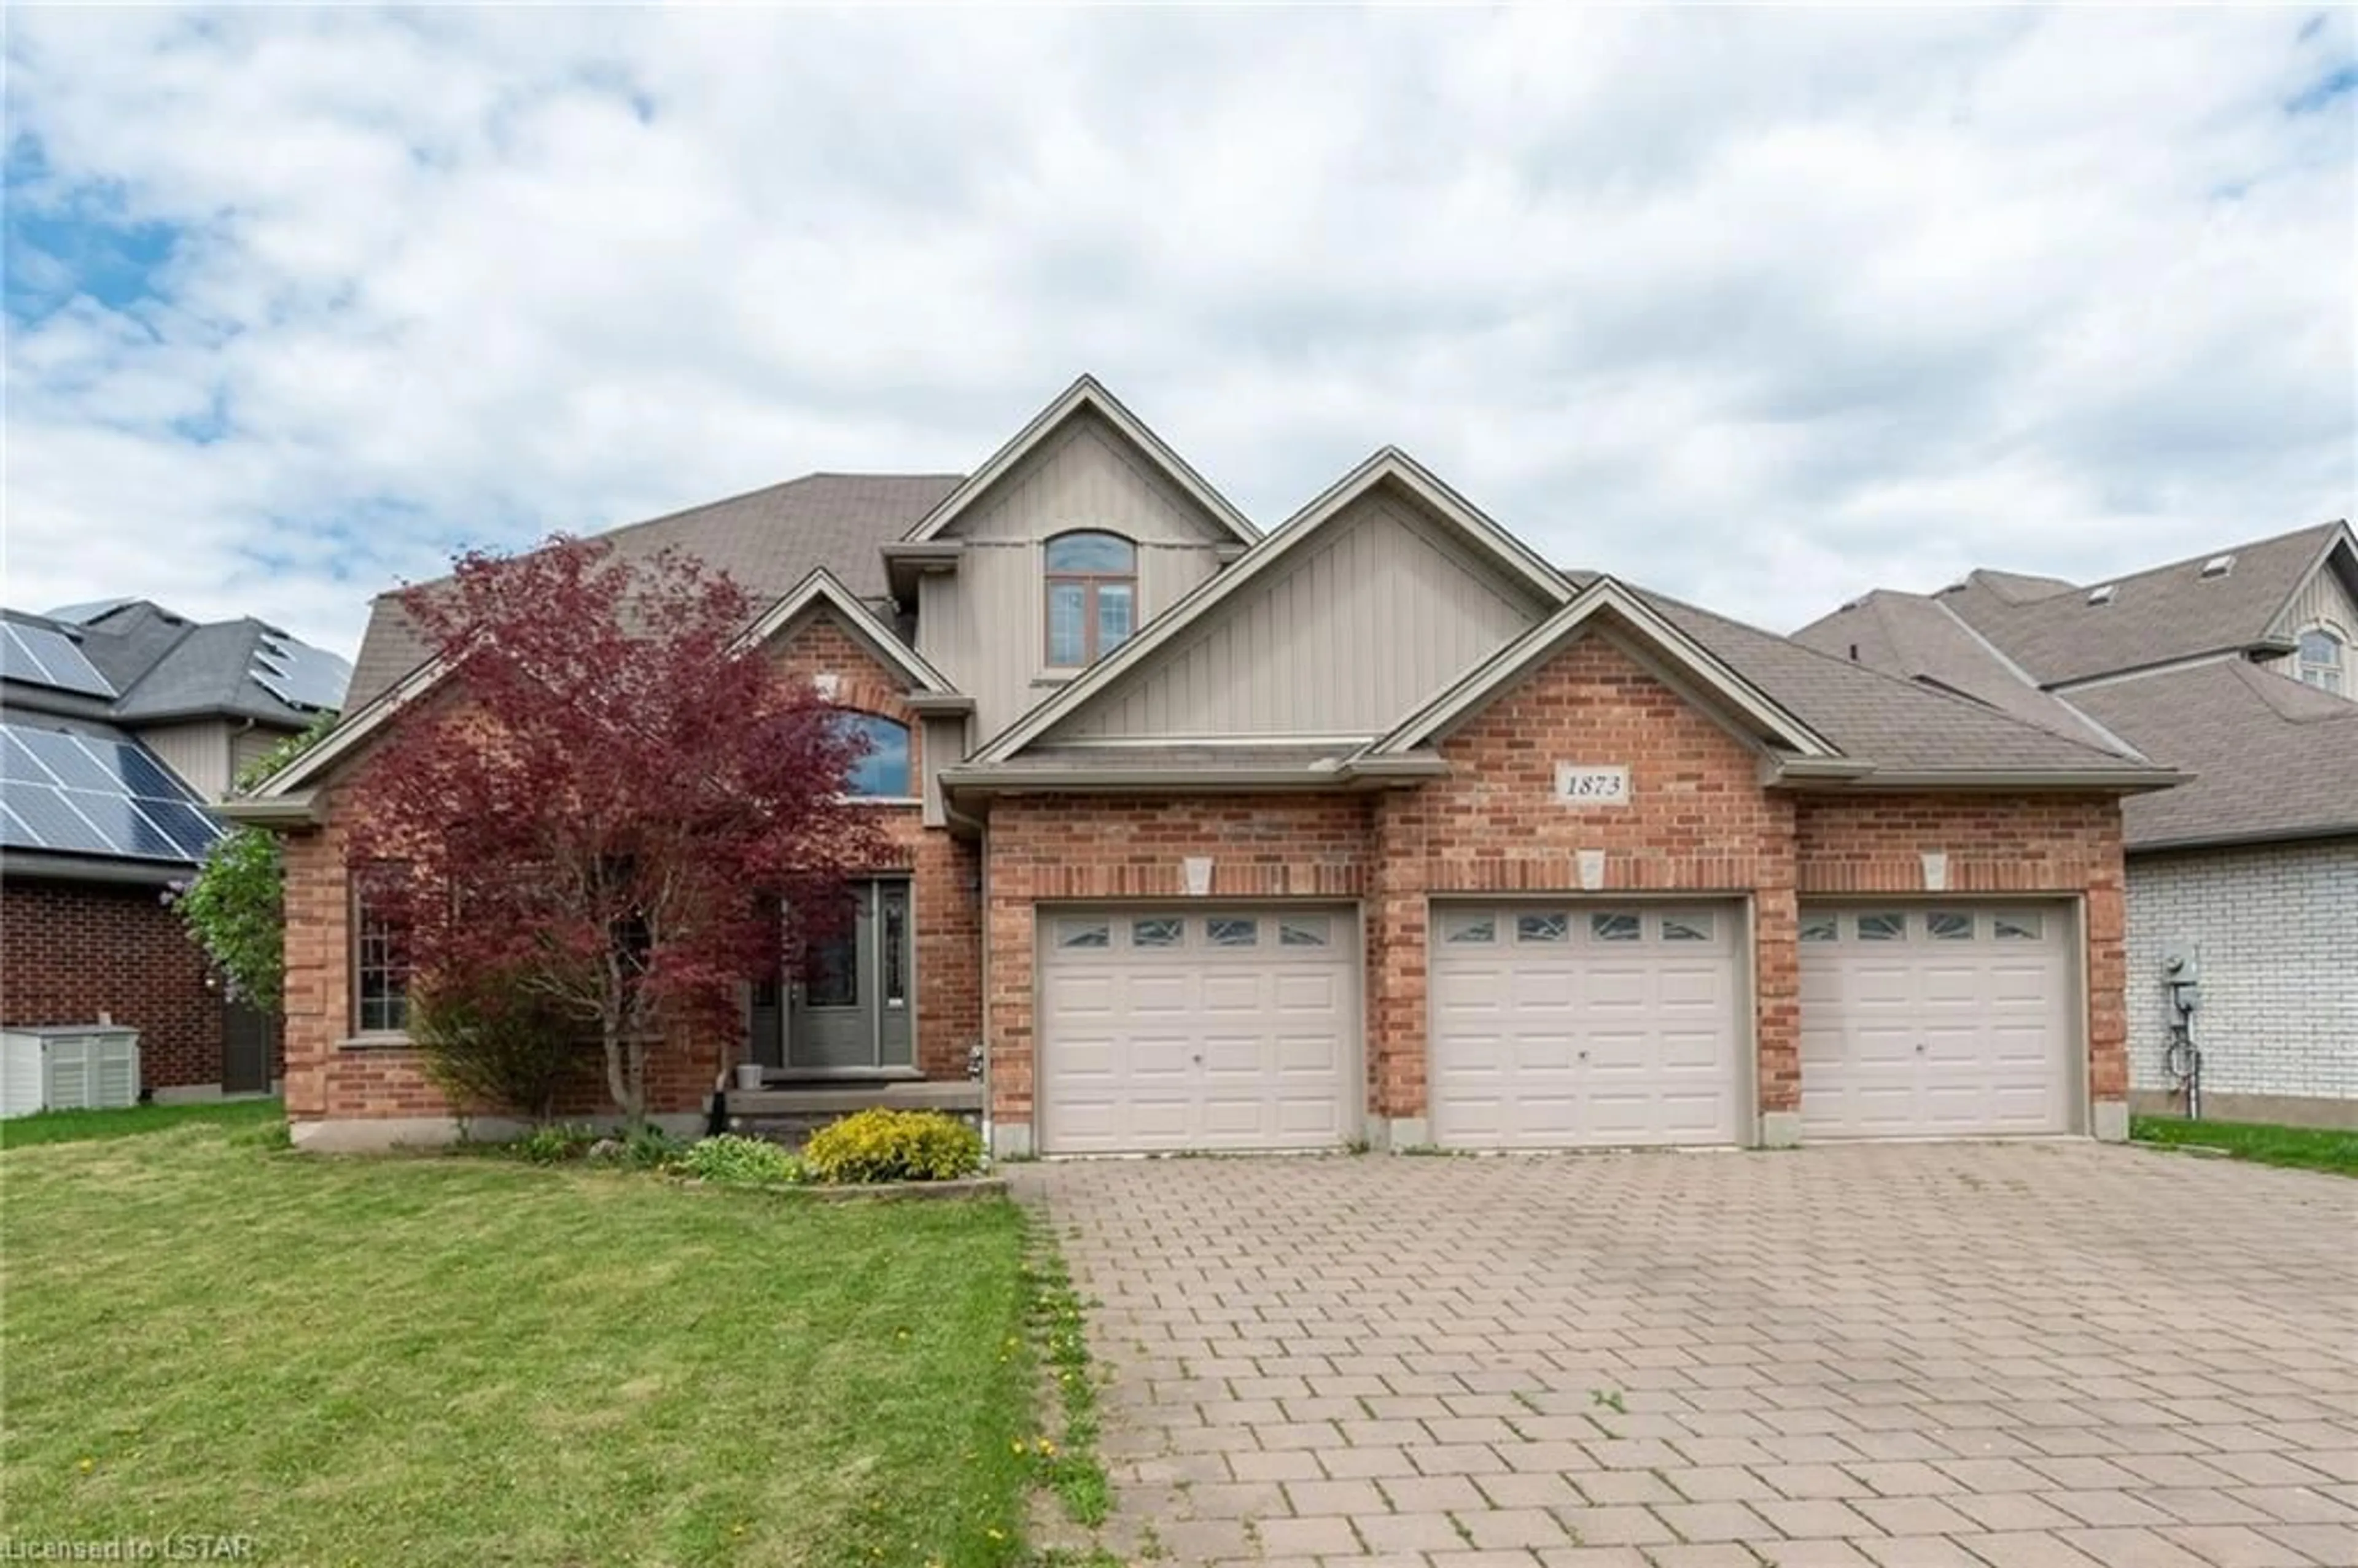 Home with brick exterior material for 1873 Kirkpatrick Way, London Ontario N6K 5A3